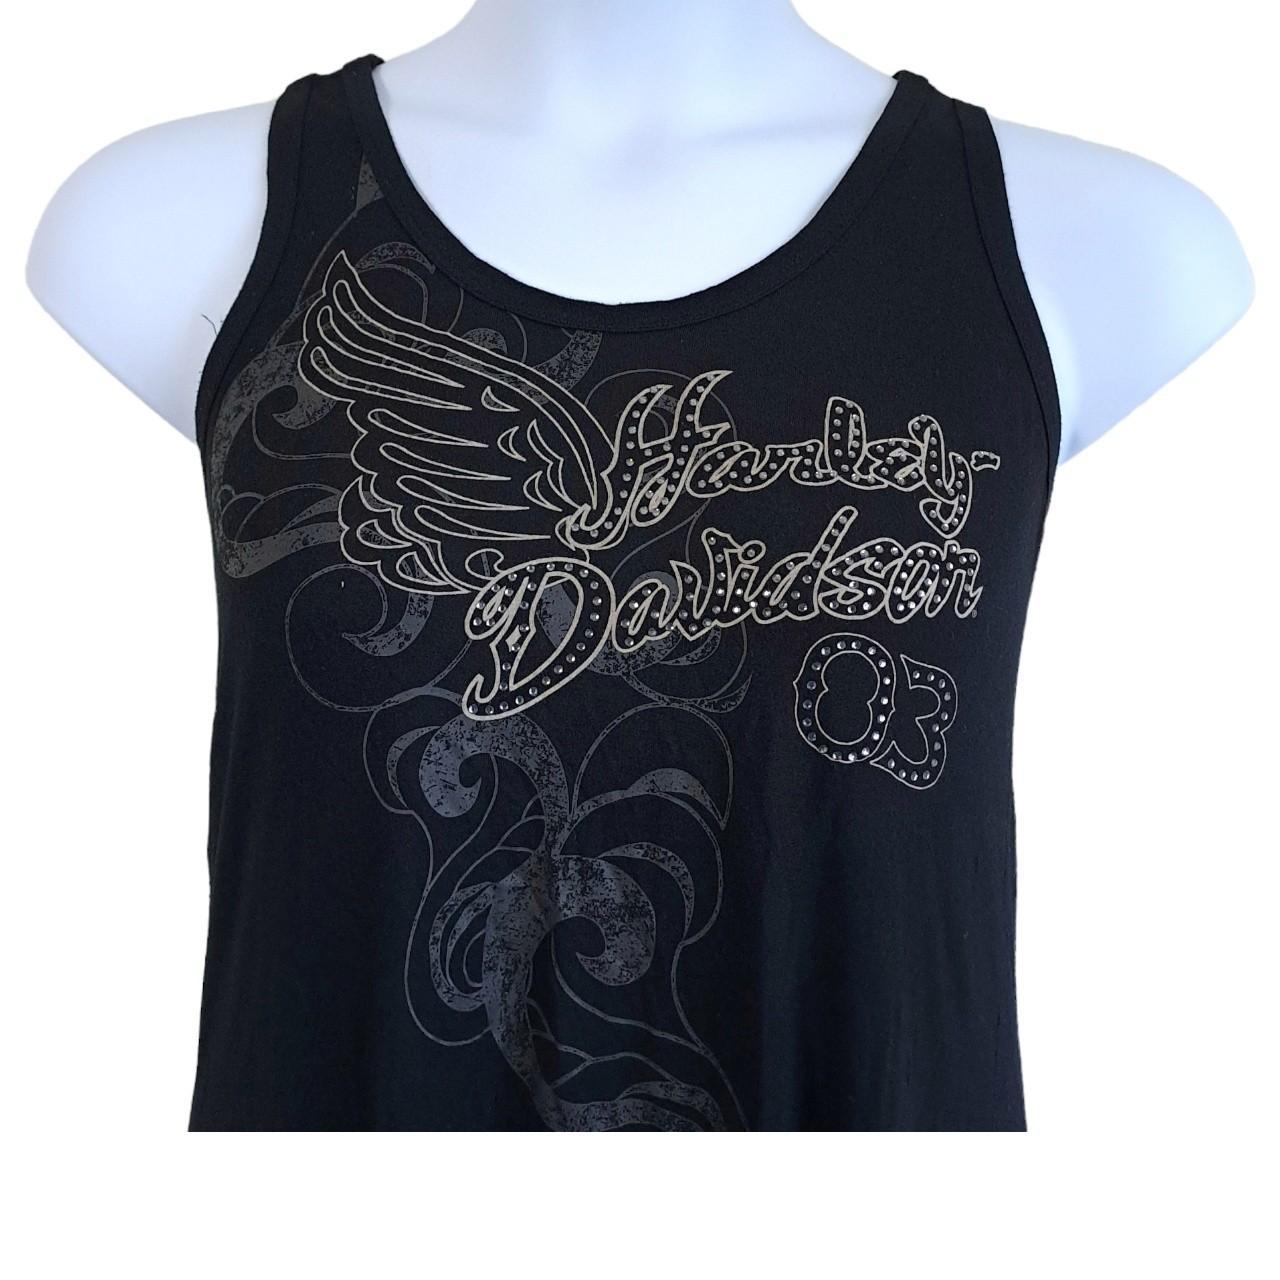 SOLD OUT | Harley Davidson Top